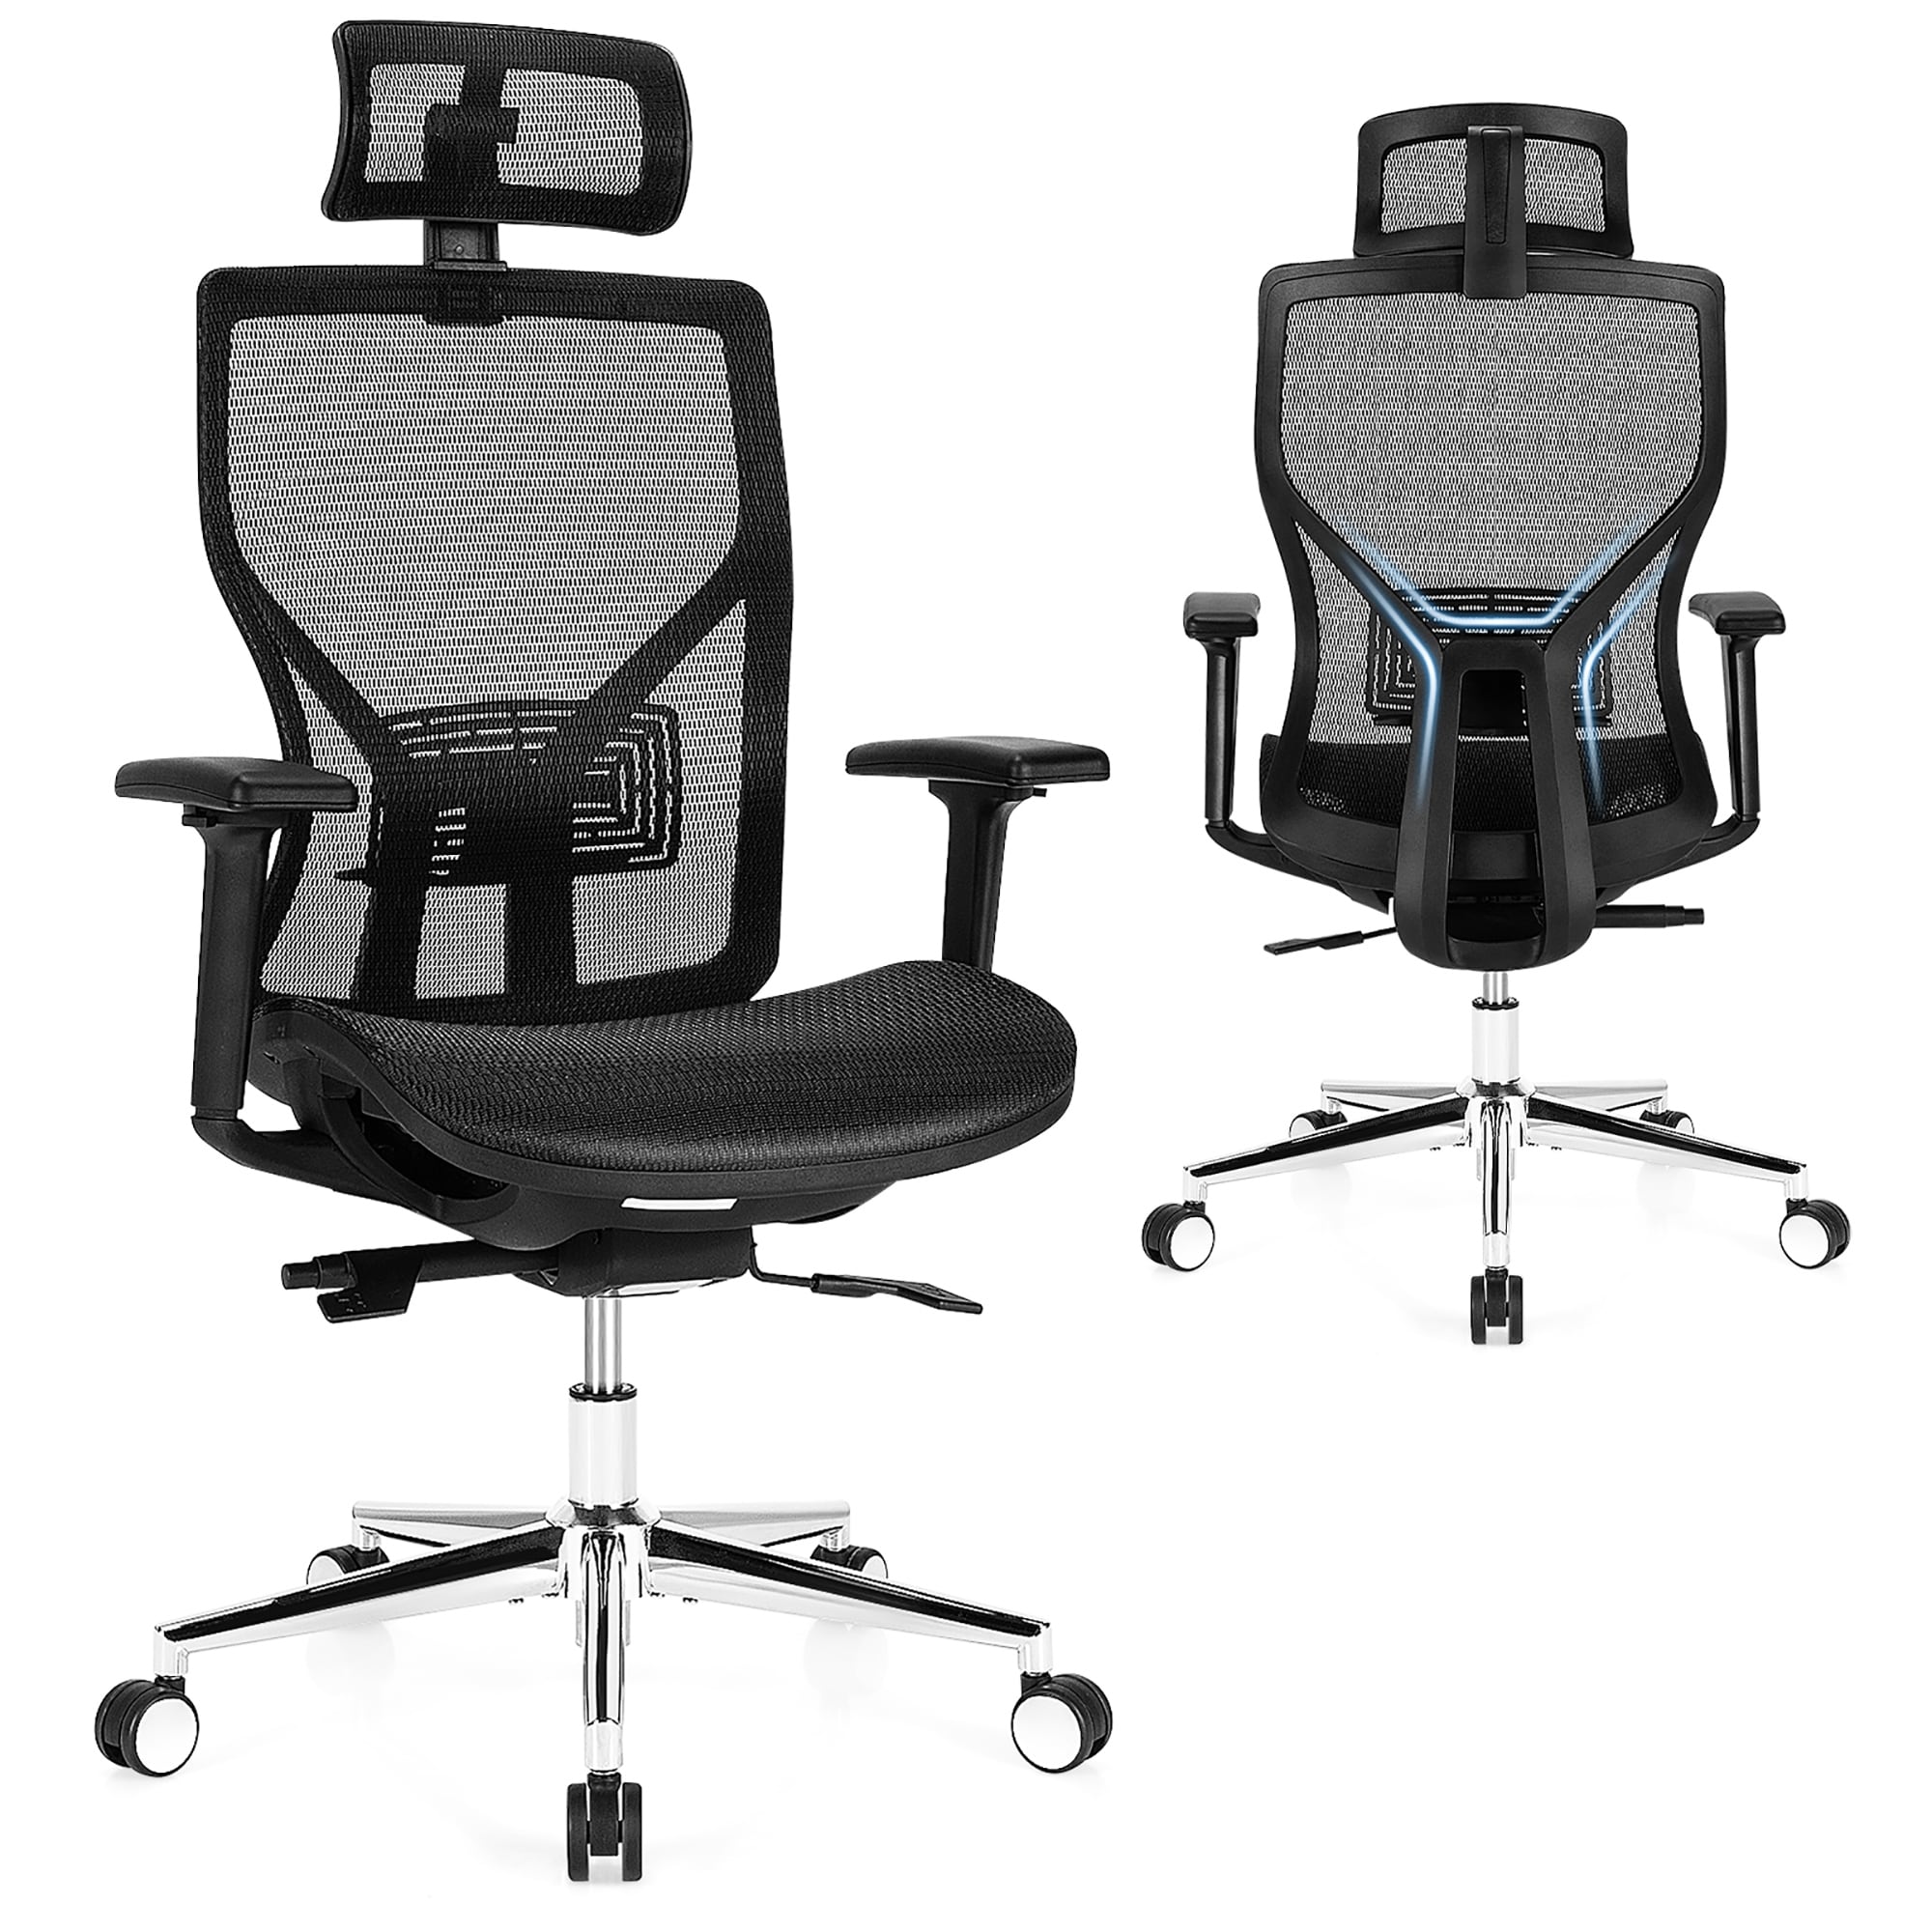 https://ak1.ostkcdn.com/images/products/is/images/direct/f1d66d0b7ae7eedc0ce560d1569c884fd3cda937/Ergonomic-Office-Chair-High-Back-Mesh-Chair-with-Adjustable-Headrest.jpg